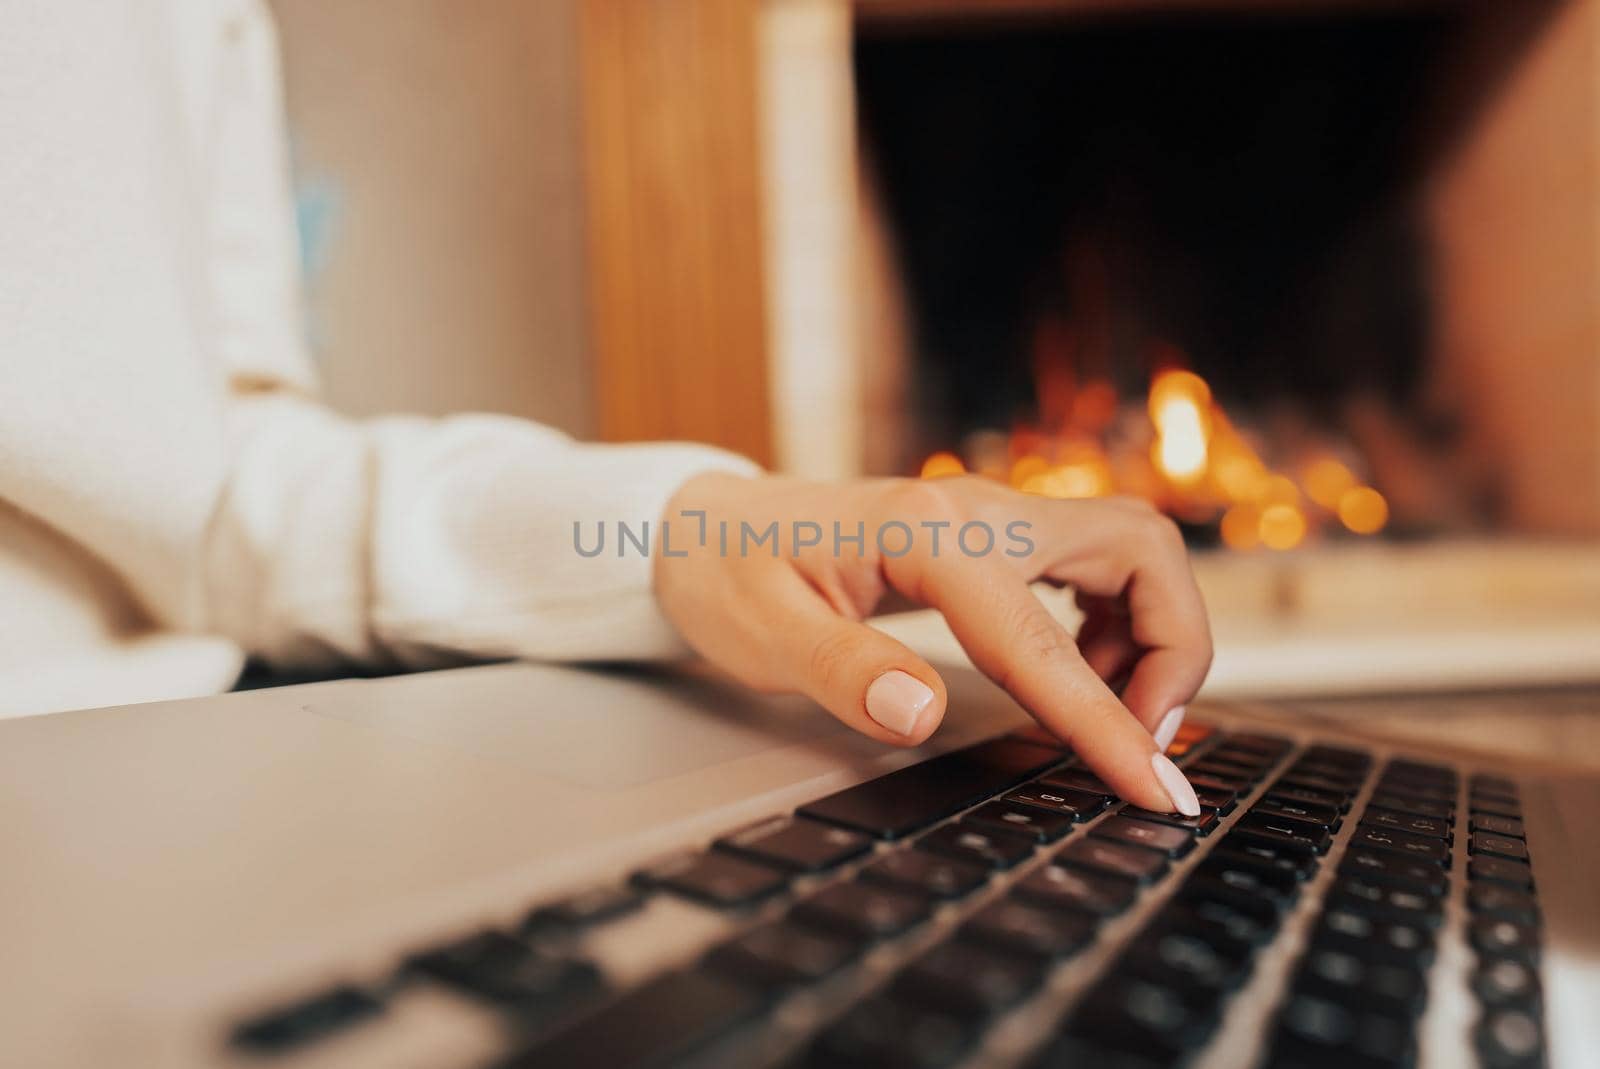 Young woman studying on laptop, sitting near cozy fireplace at home. Focus on hands typing on keyboard. Social distancing concept. Lady writing message to friends. by kristina_kokhanova